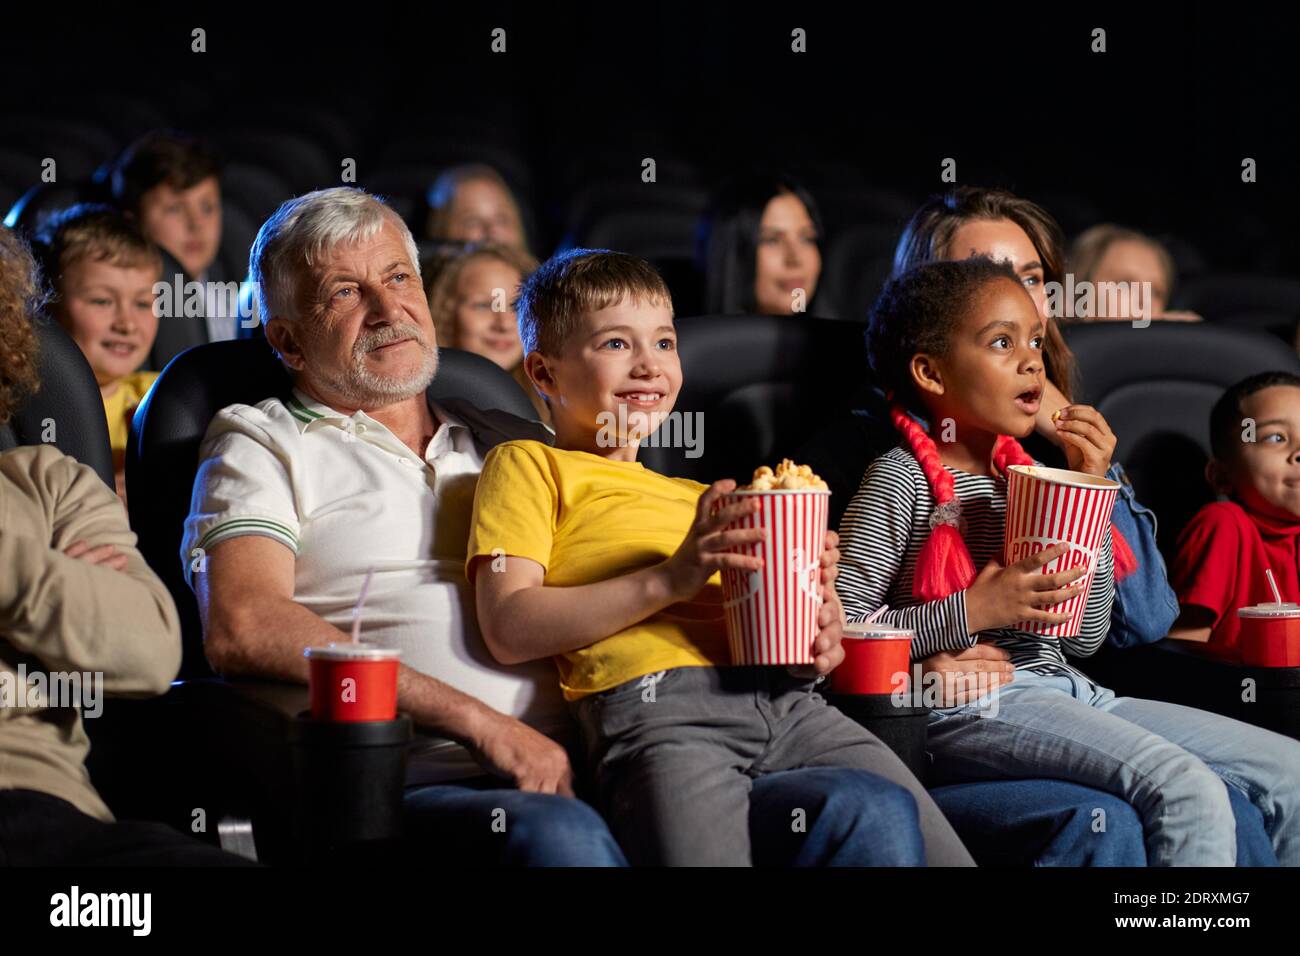 Little african girl with caucasian woman and caucasian boy with senior grandfather. Side view of multiracial kids holding popcorn and sitting on knees Stock Photo